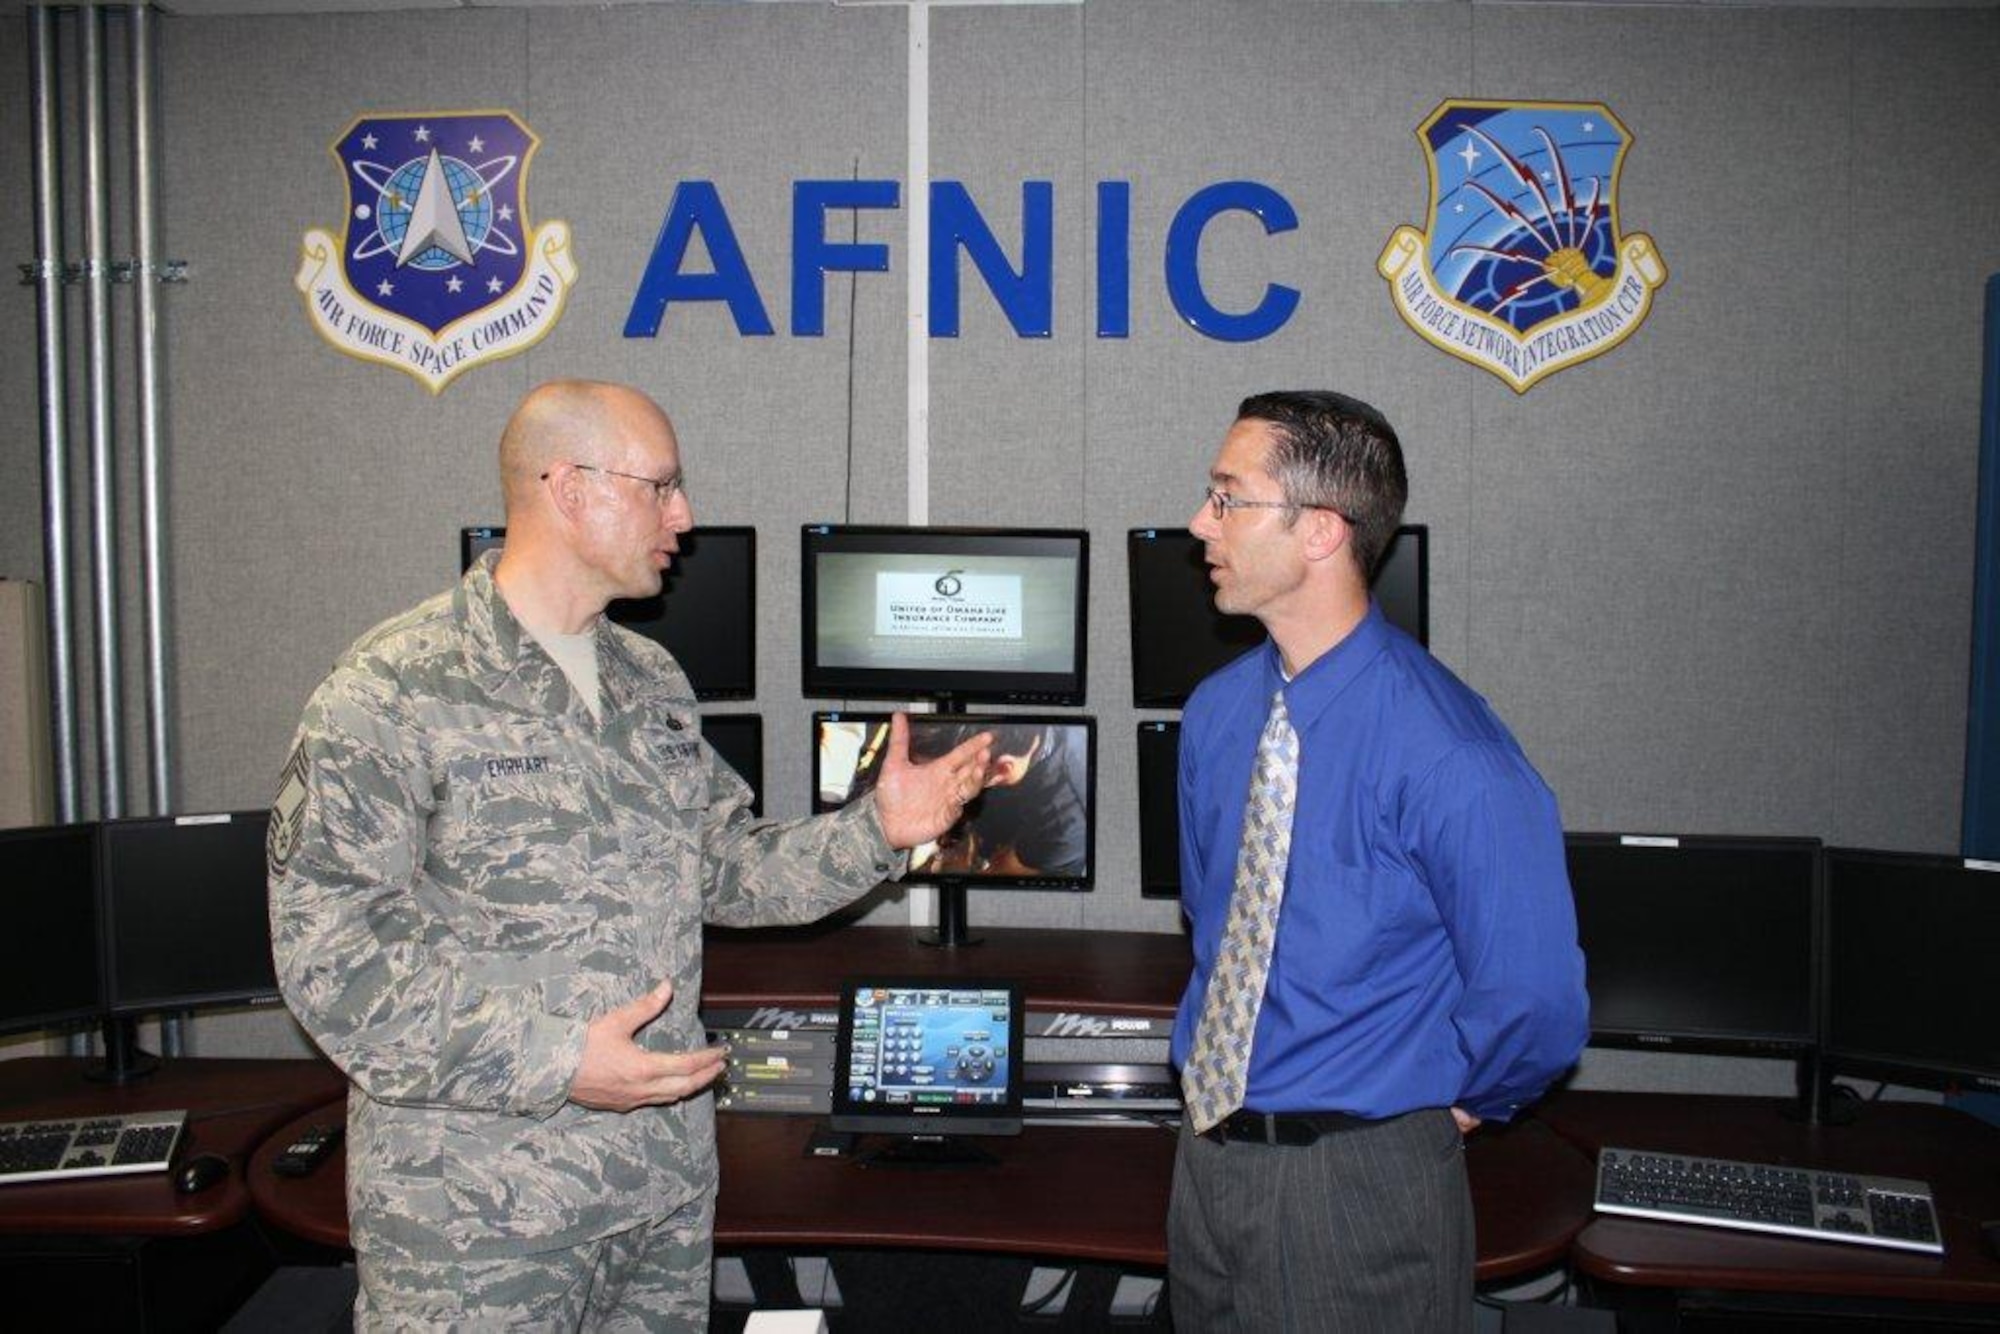 SCOTT AIR FORCE BASE, Ill. – Welcome Chief Master Sgt. Robert "Bob" Ehrhart, our new AFNIC Superintendent! He replaces Chief Master Sgt. Terry Anderson, who will PCS in July. Ehrhardt comes to us from Schriever AFB, Colo., where he served as the superintendent of the Space Innovation and Development Center (SIDC). Welcome to the AFNIC family!